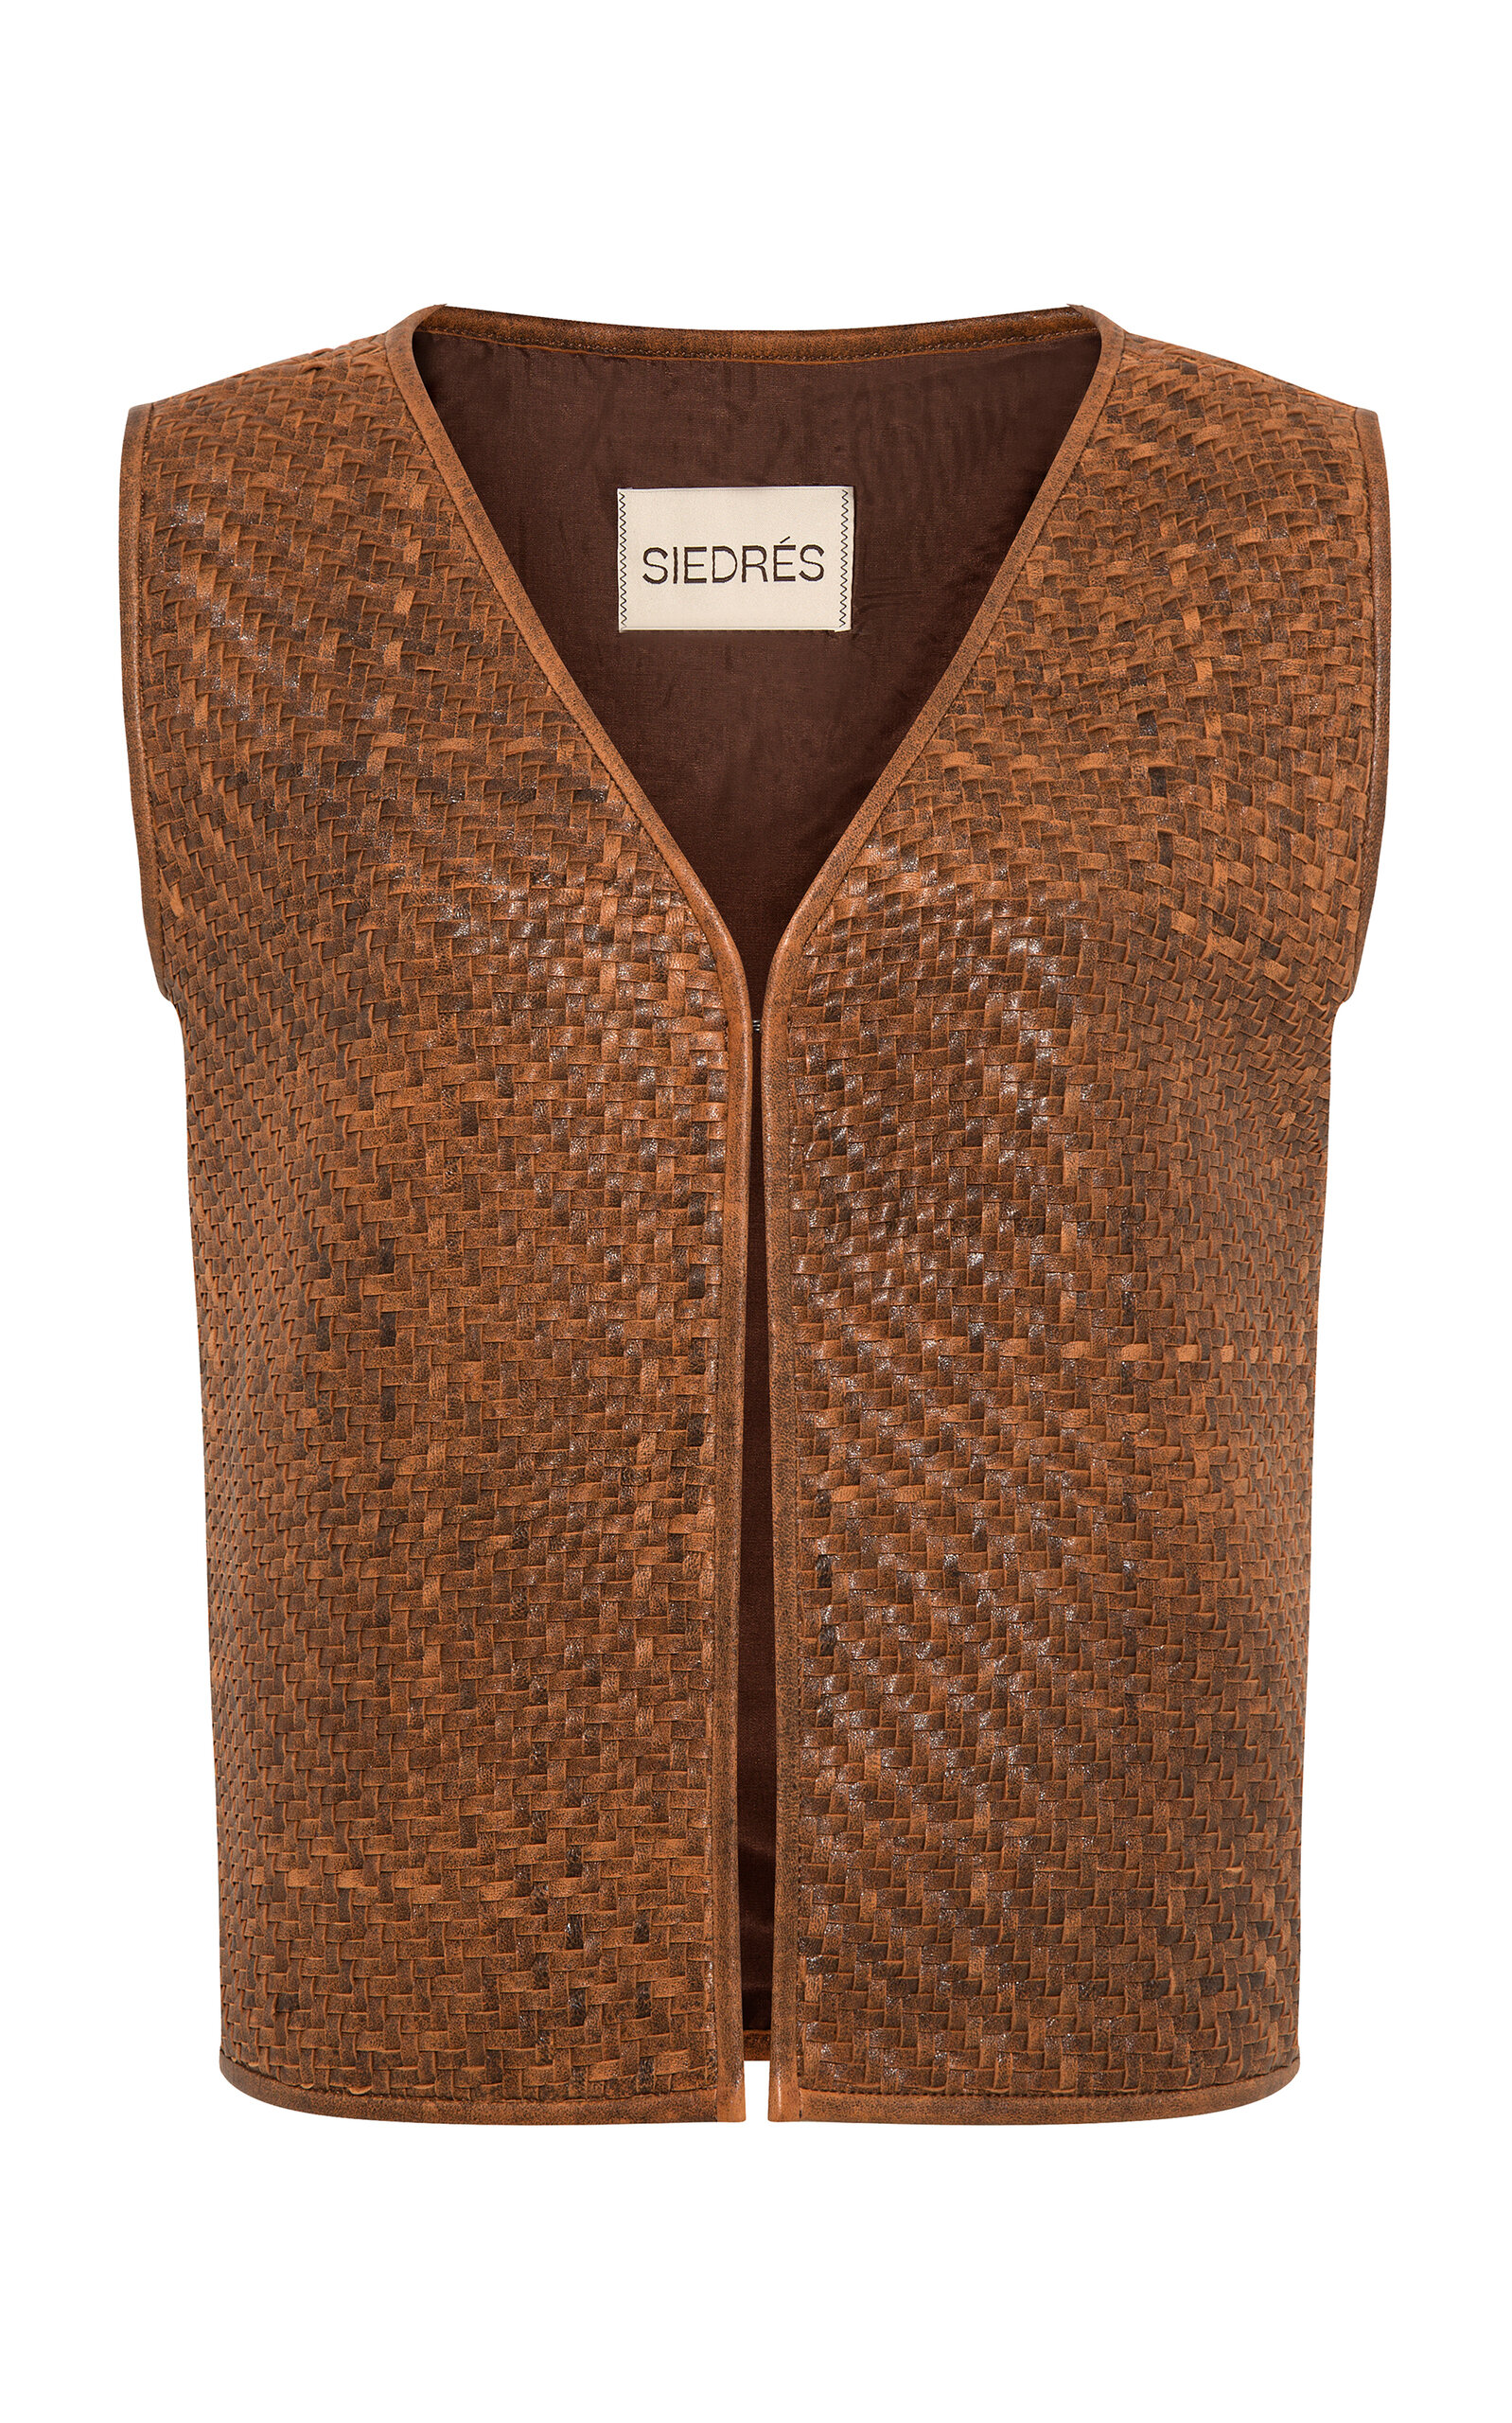 Siedres Enty Woven Leather Vest In Brown